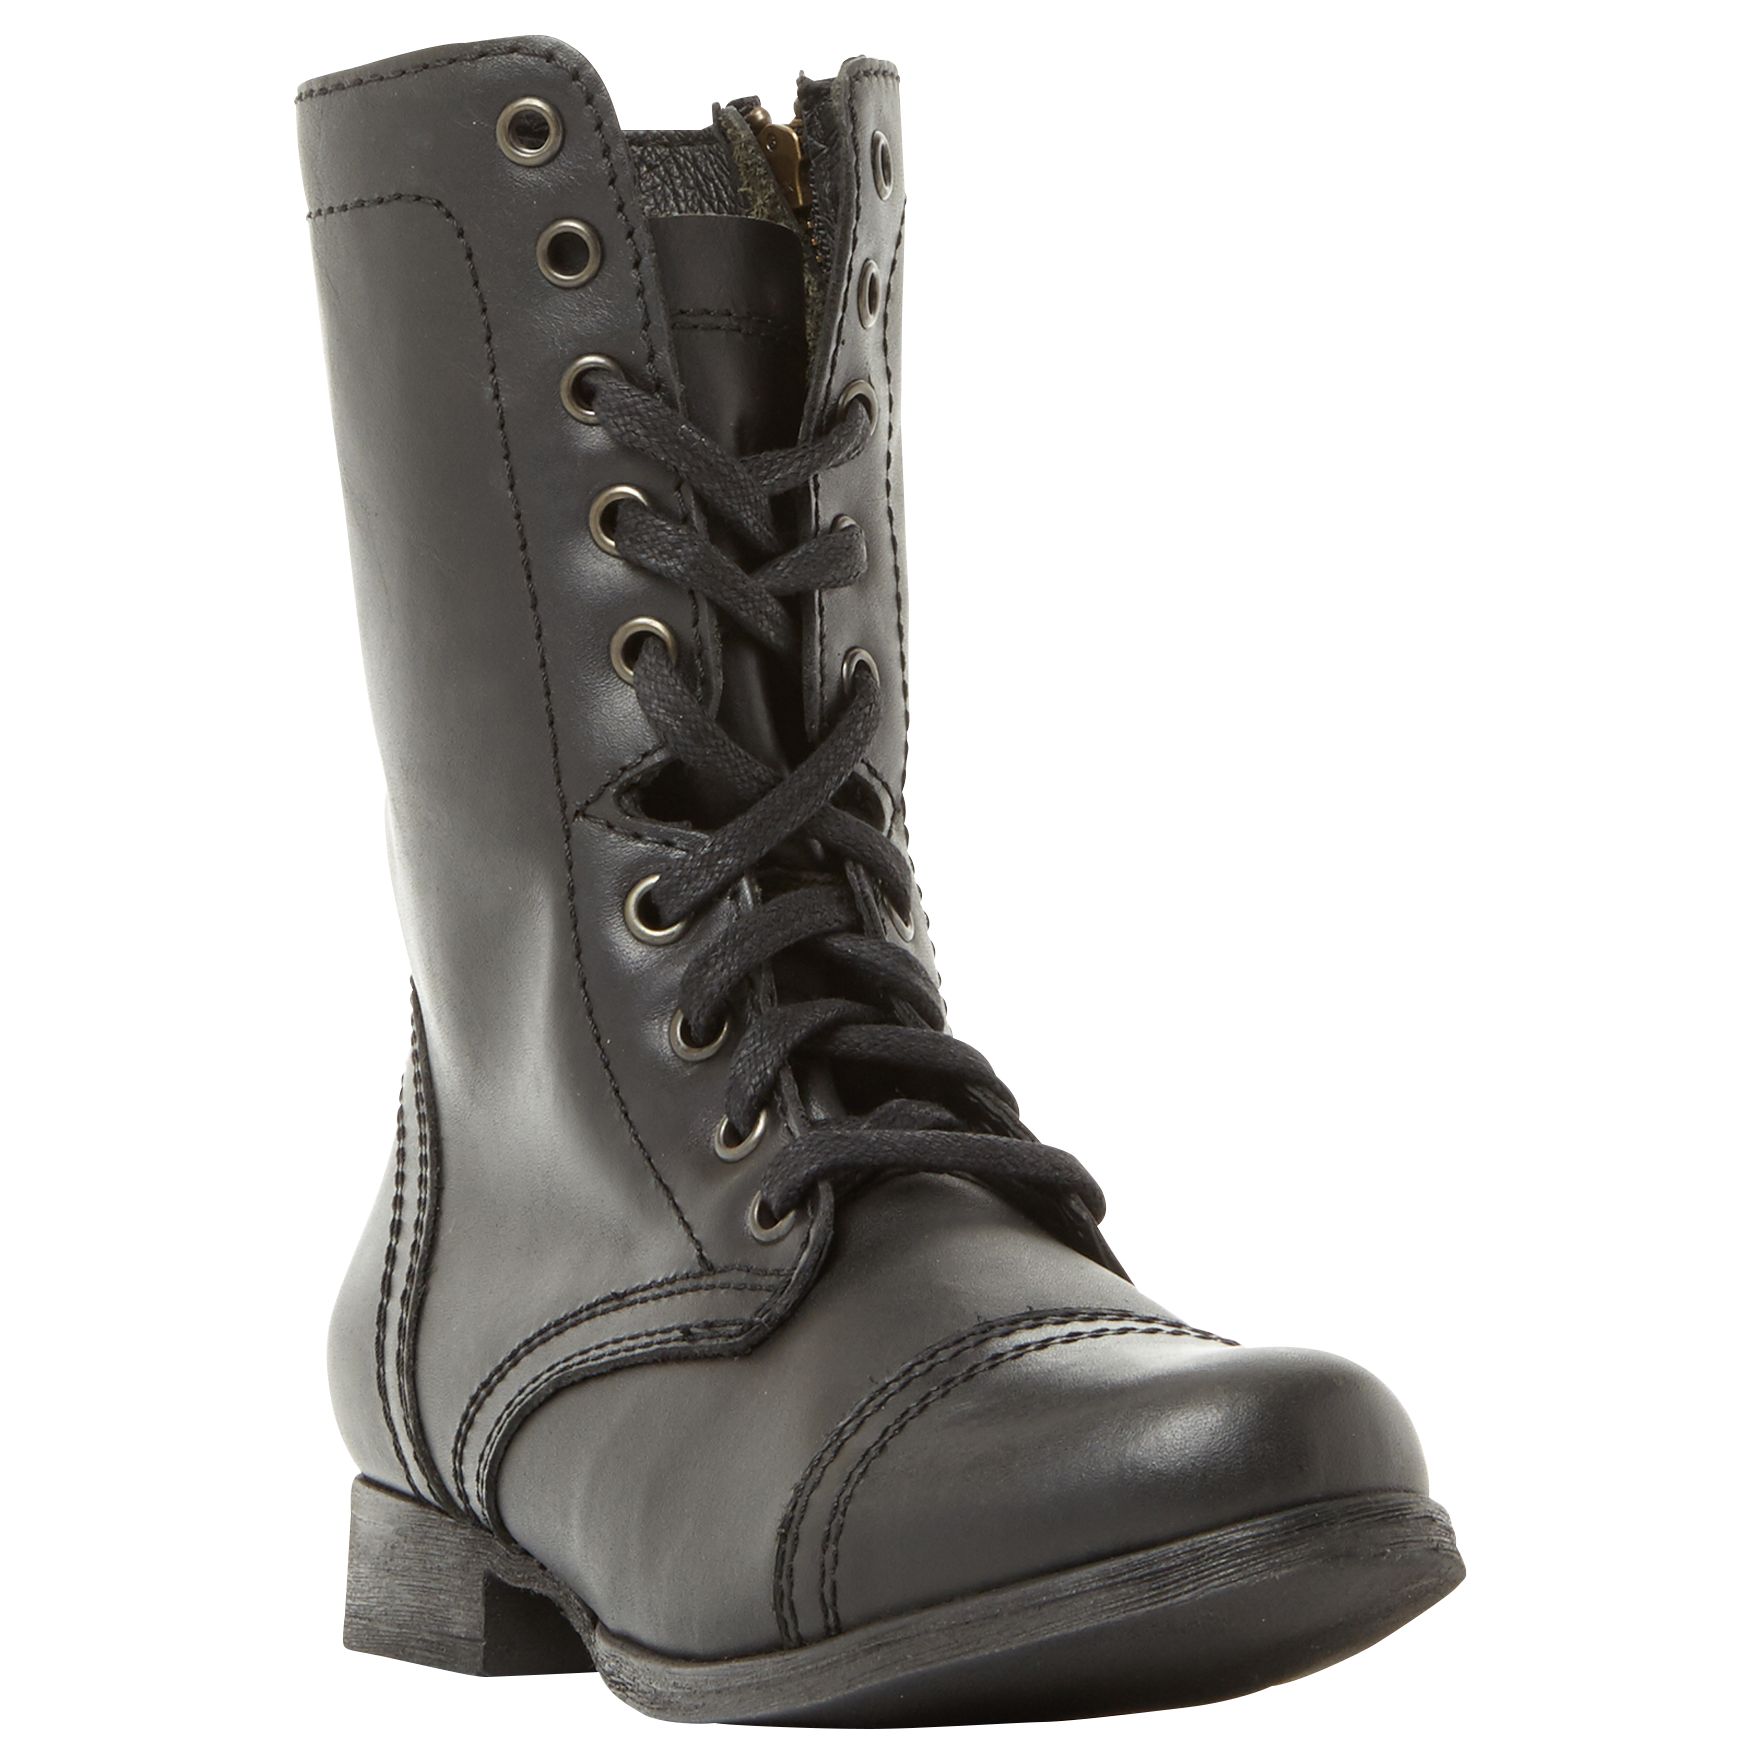 Steve Madden Troopa Lace Up Boots, Black, 5